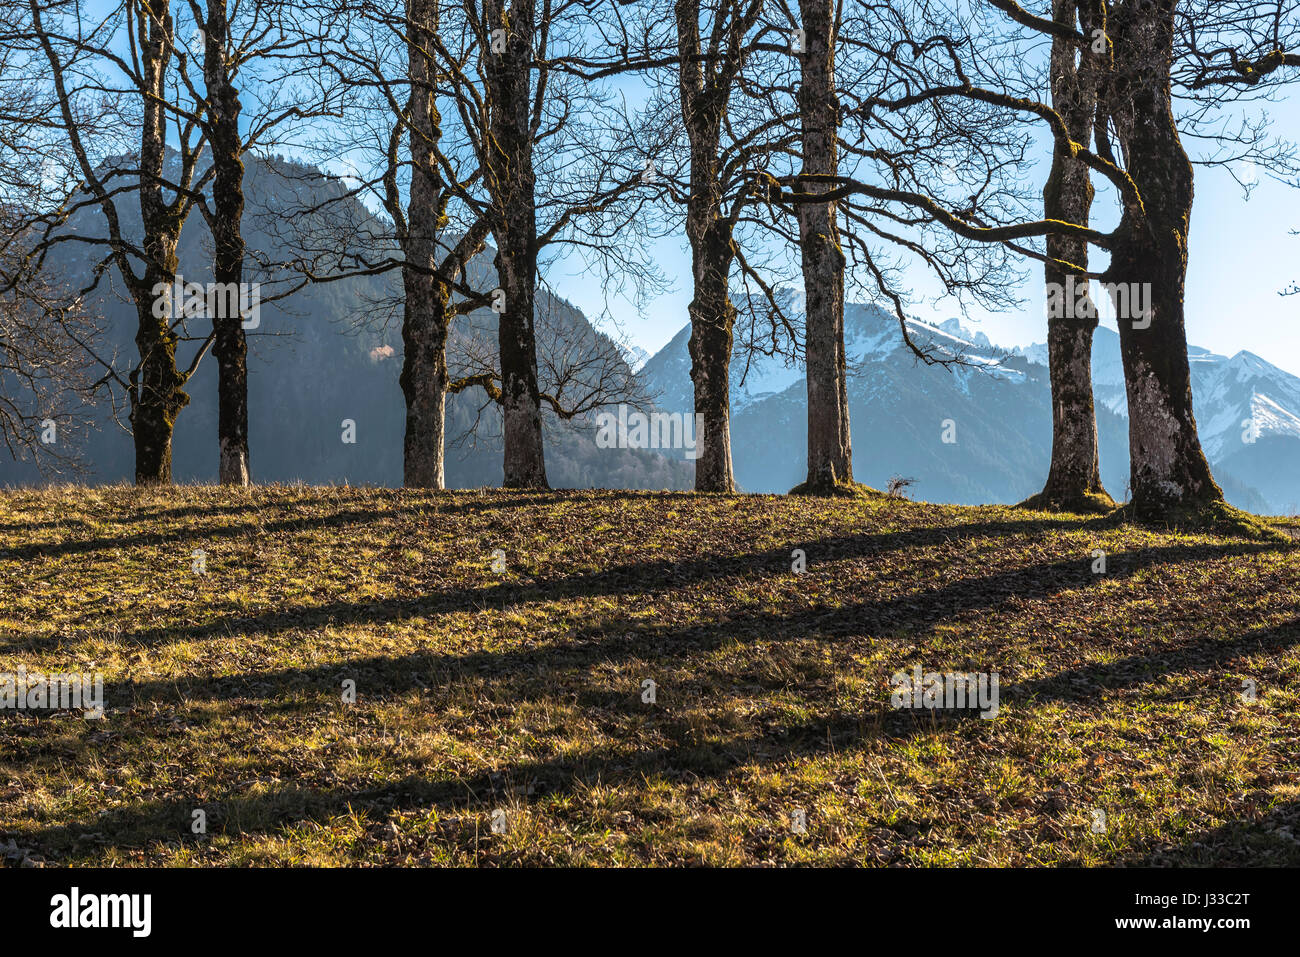 Autumn Landscape in the German Alps,  meadow with tree line and snowy mountains in the background. Sun casting long shadows, Oberstdorf, Allgaeu, Germany Stock Photo